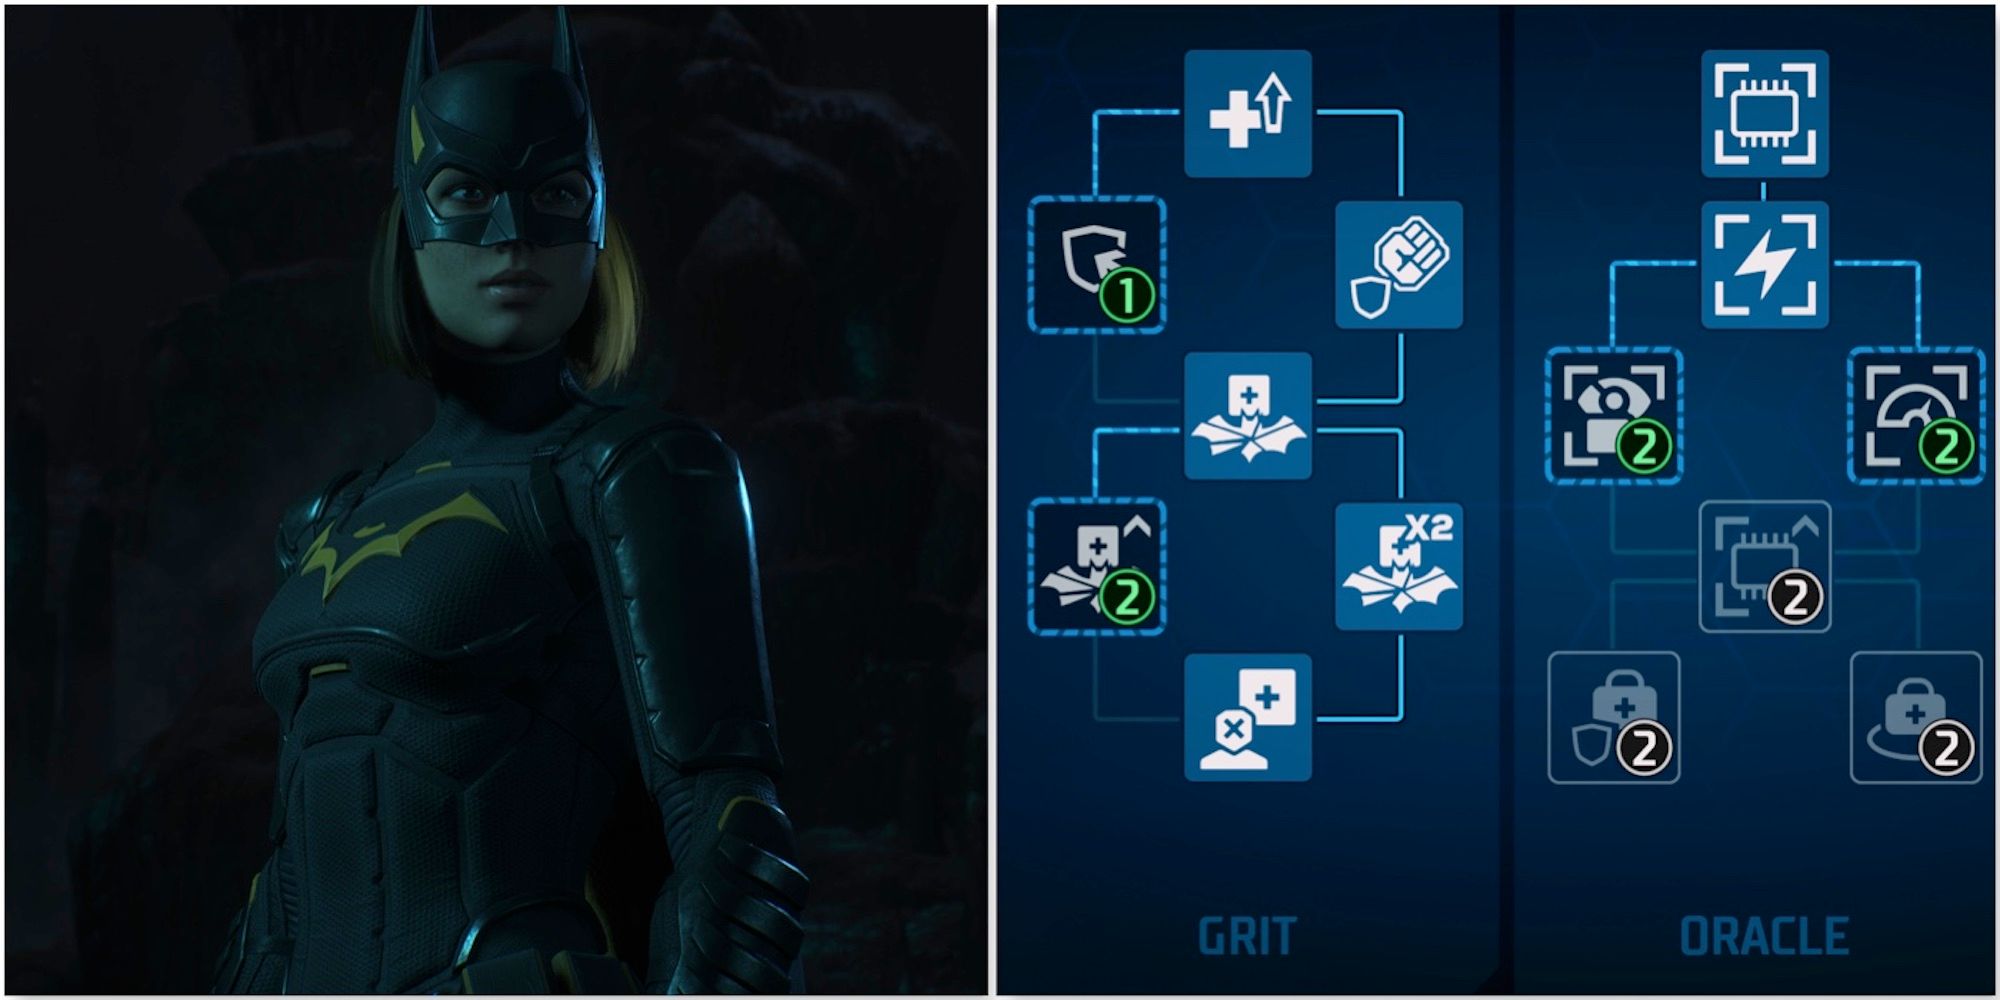 Batgirl and the upgrade tree in Gotham Knights